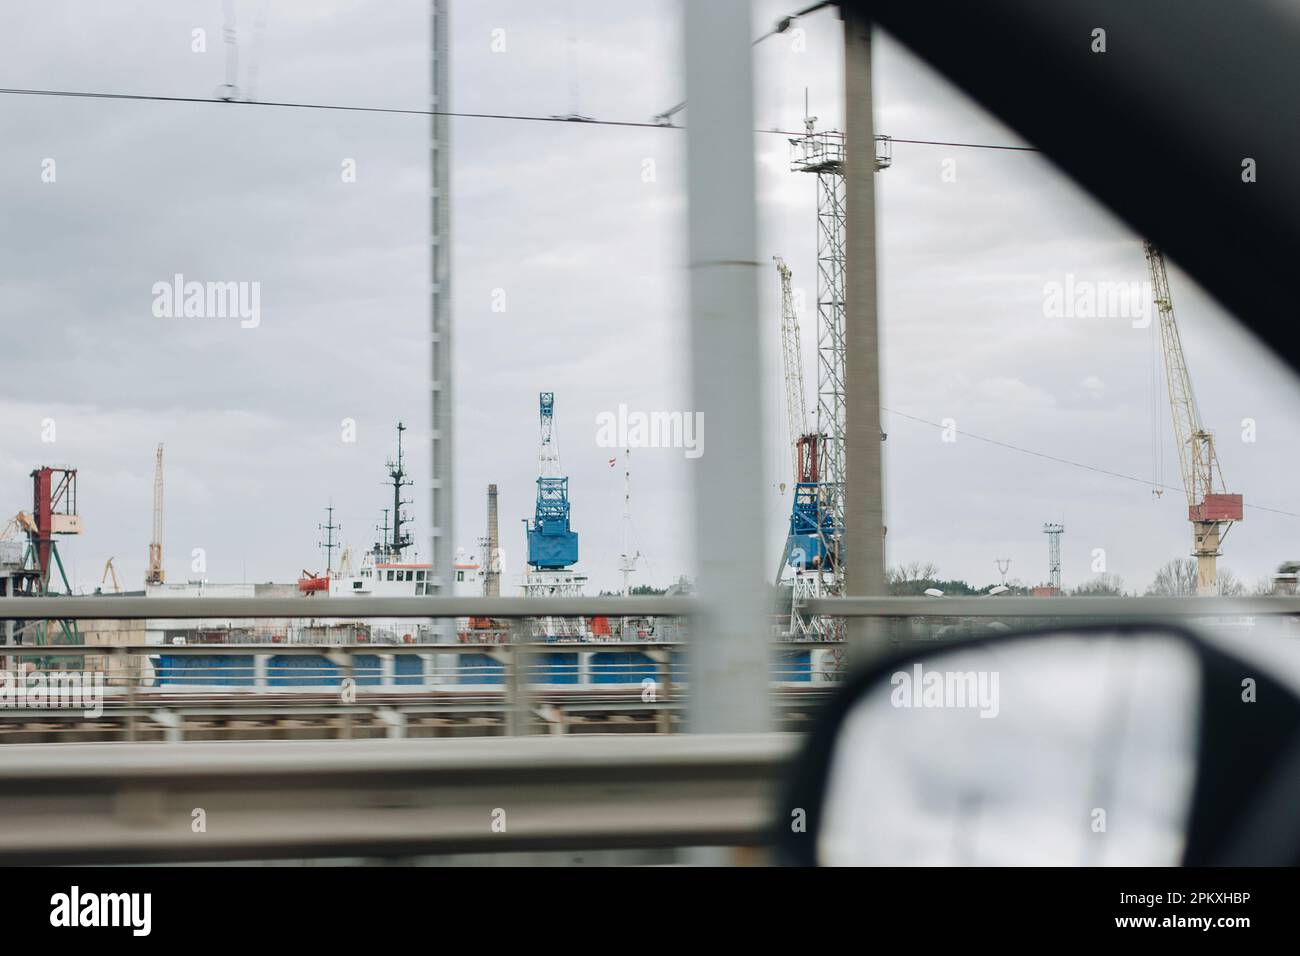 View from the window of a moving car on the metal traffic cranes in the transport port. Stock Photo